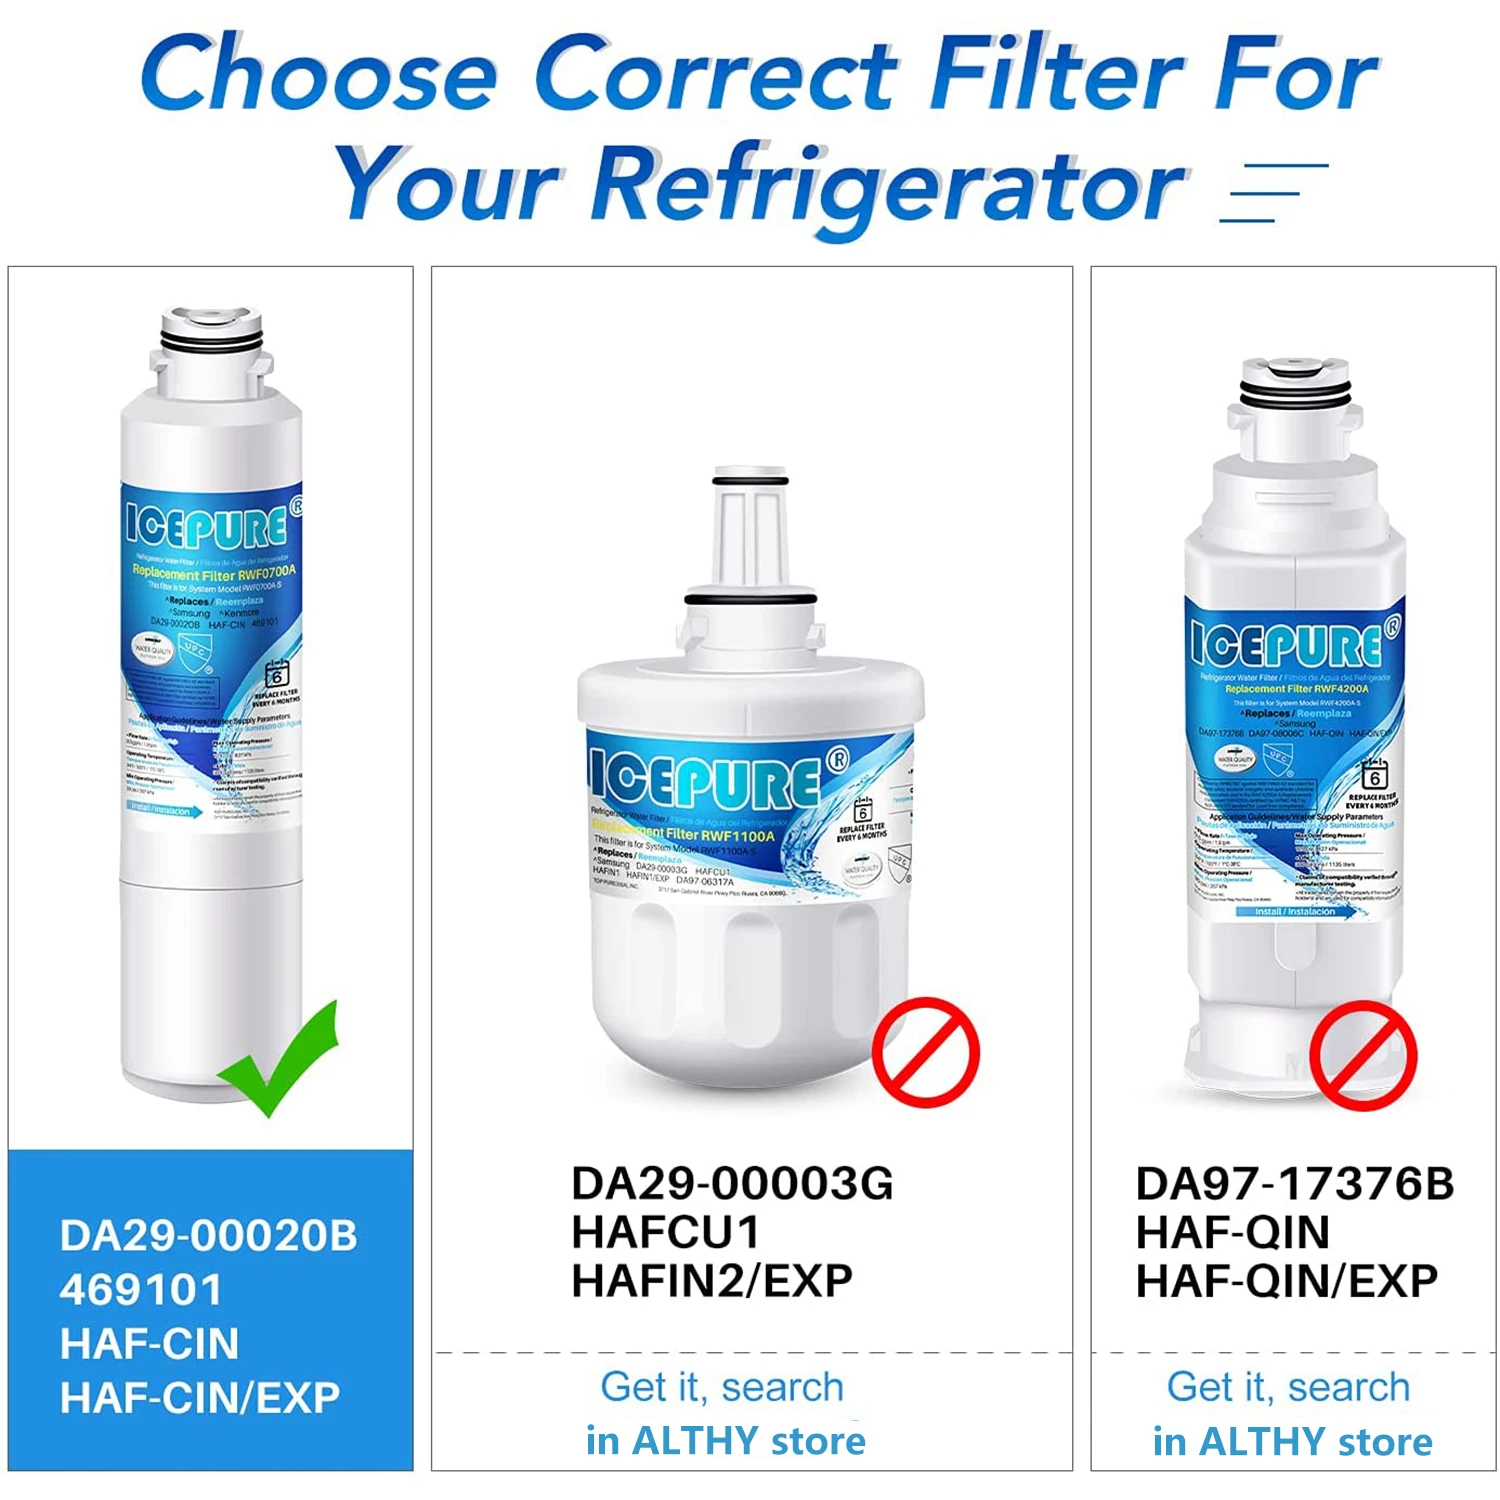 ICEPURE Refrigerator Water Filter Replacement for Samsung DA29-00020B, DA29-00020A, HAF-CIN EXP & KENMORE 469101 -NSF 42 NSF 372 enlarge